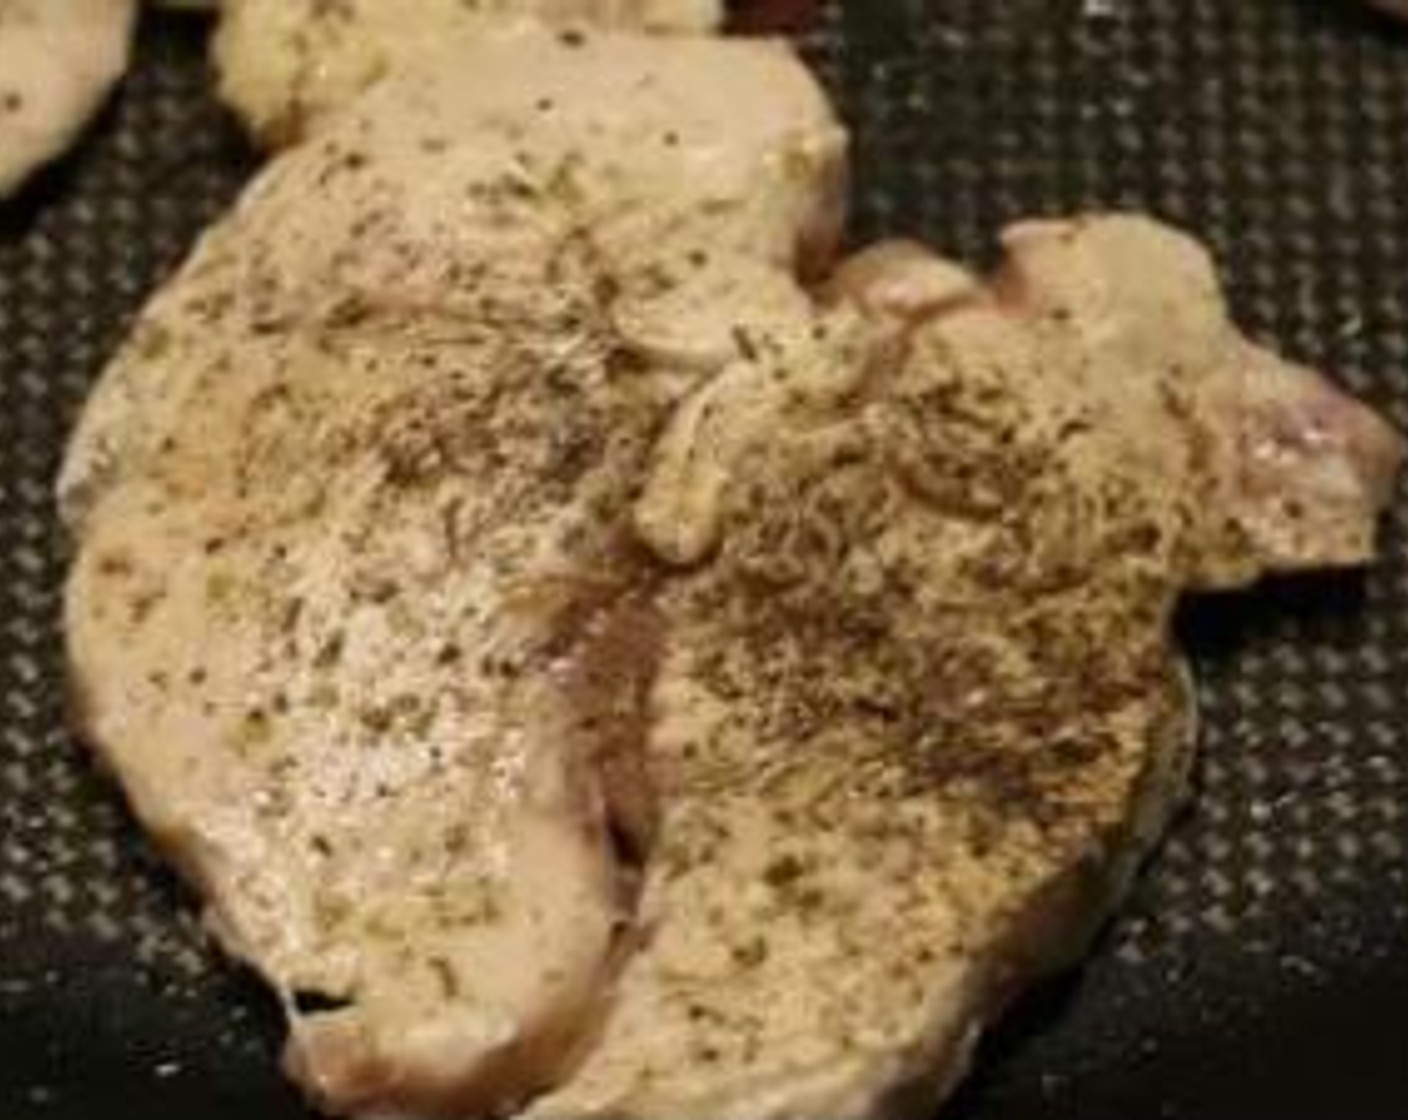 step 4 Mix Salt (1 tsp), Ground Black Pepper (1 tsp), and Fresh Oregano (1 tsp) together. Sprinkle each breast with the seasoning.